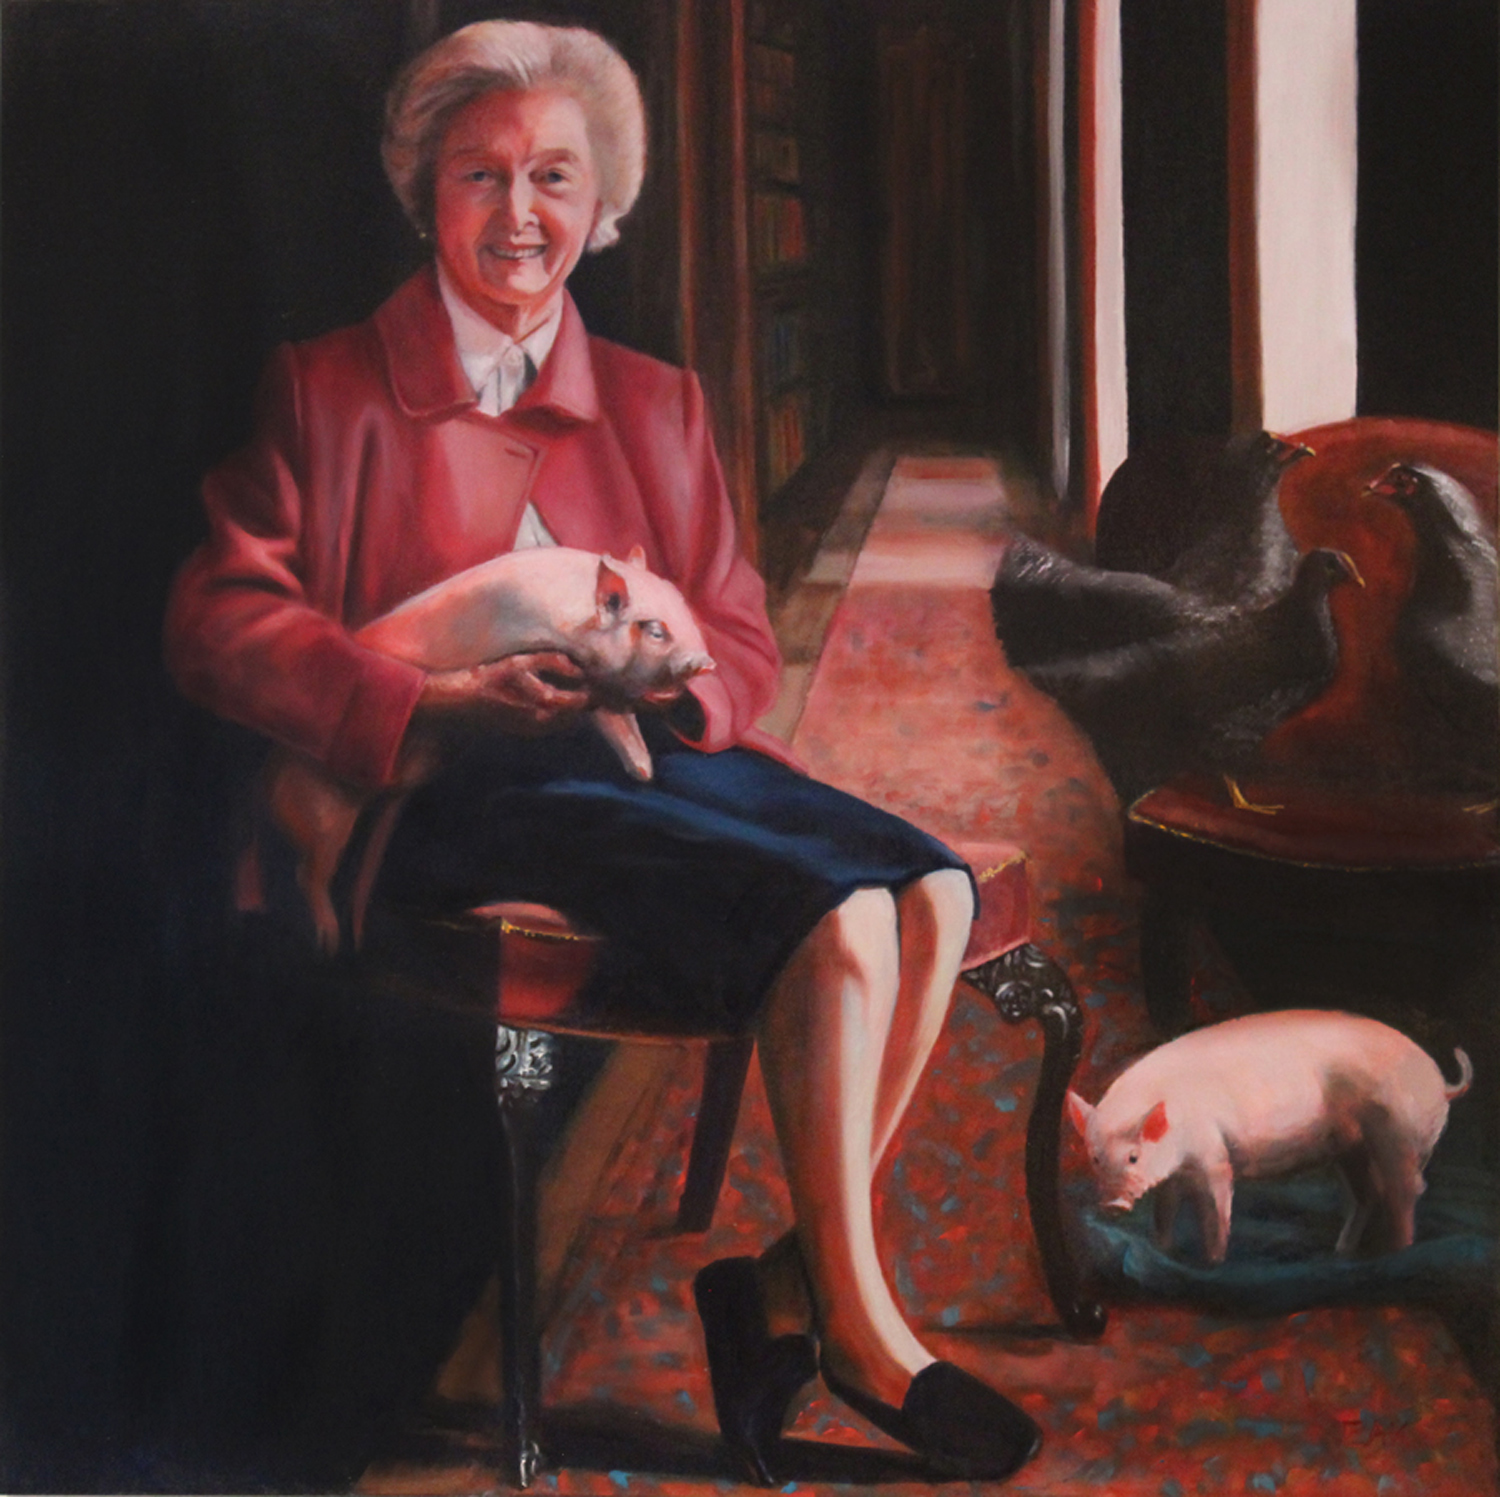 The Dowager Duchess of Devonshire